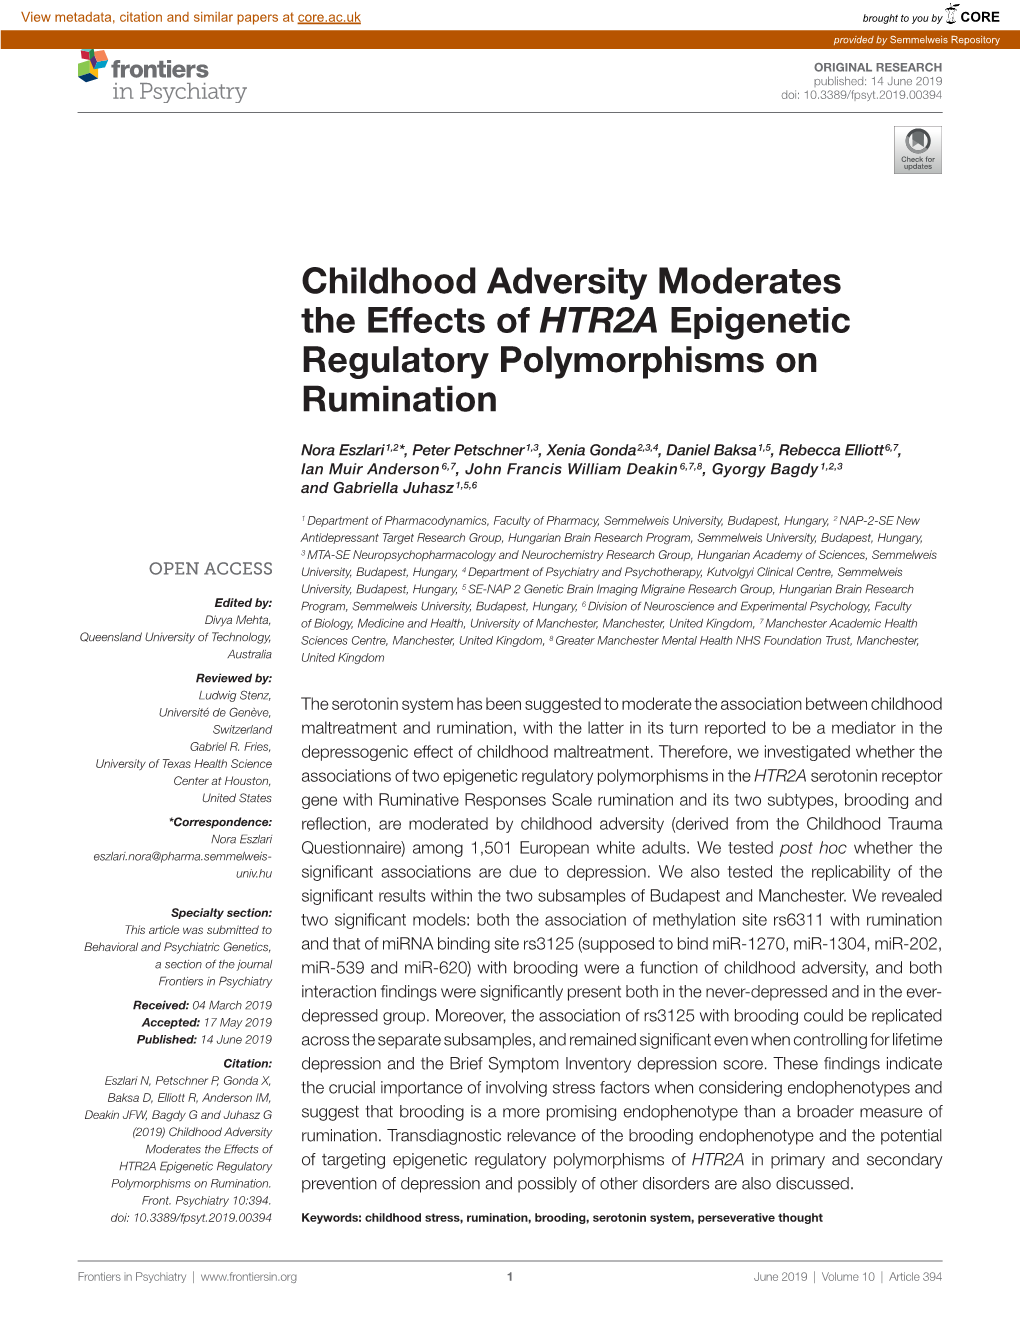 Childhood Adversity Moderates the Effects of HTR2A Epigenetic Regulatory Polymorphisms on Rumination